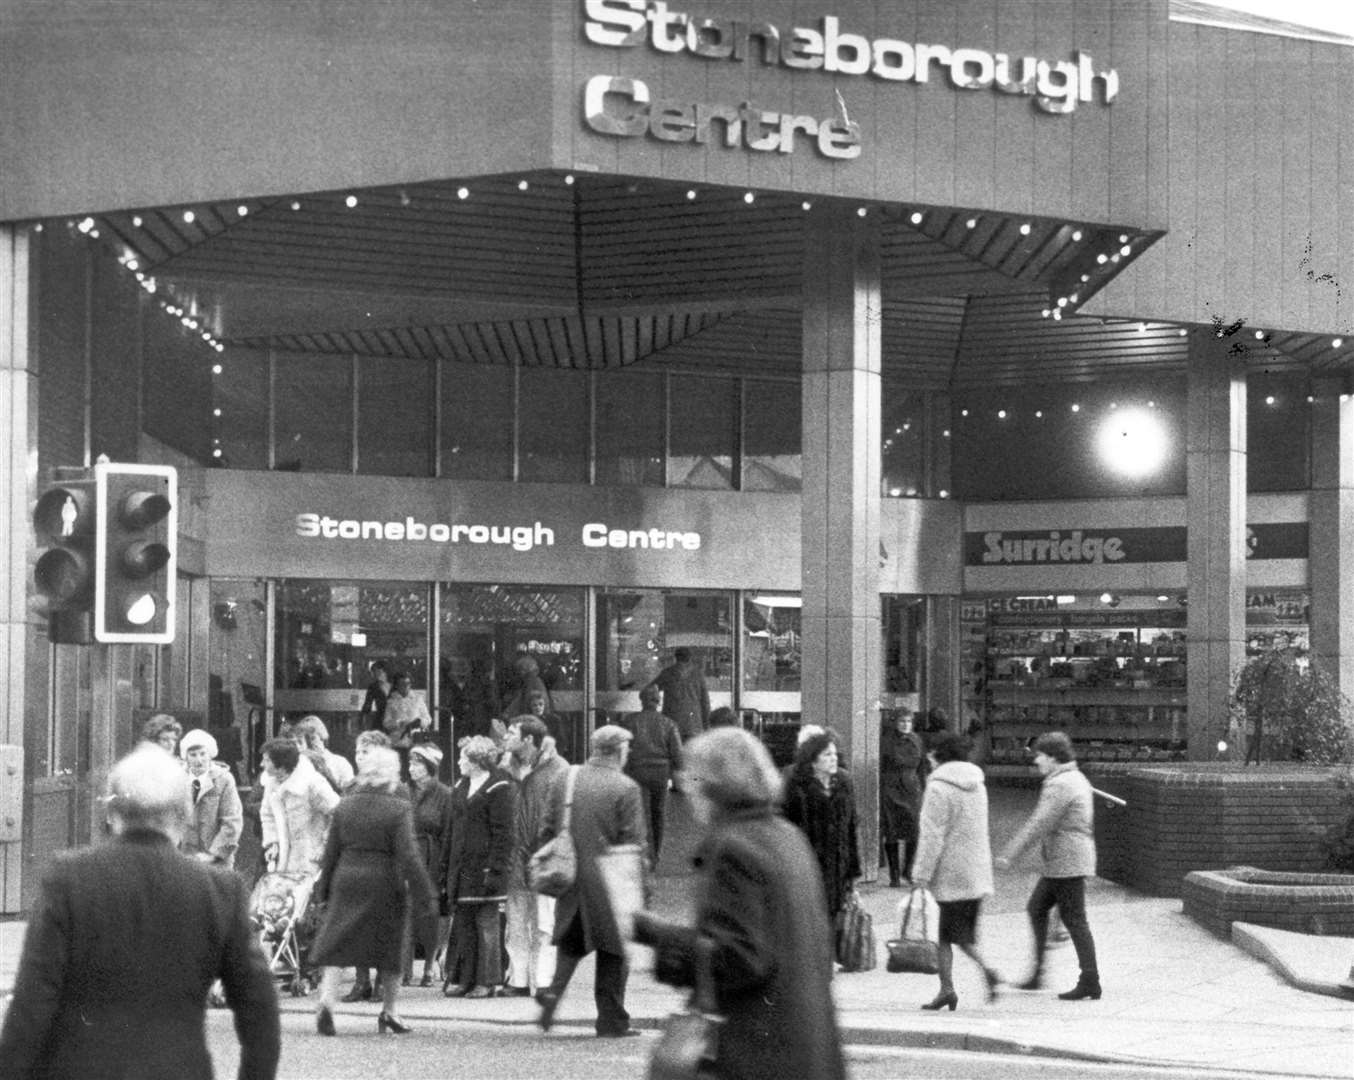 The Stoneborough Centre in January 1982, now known as The Mall